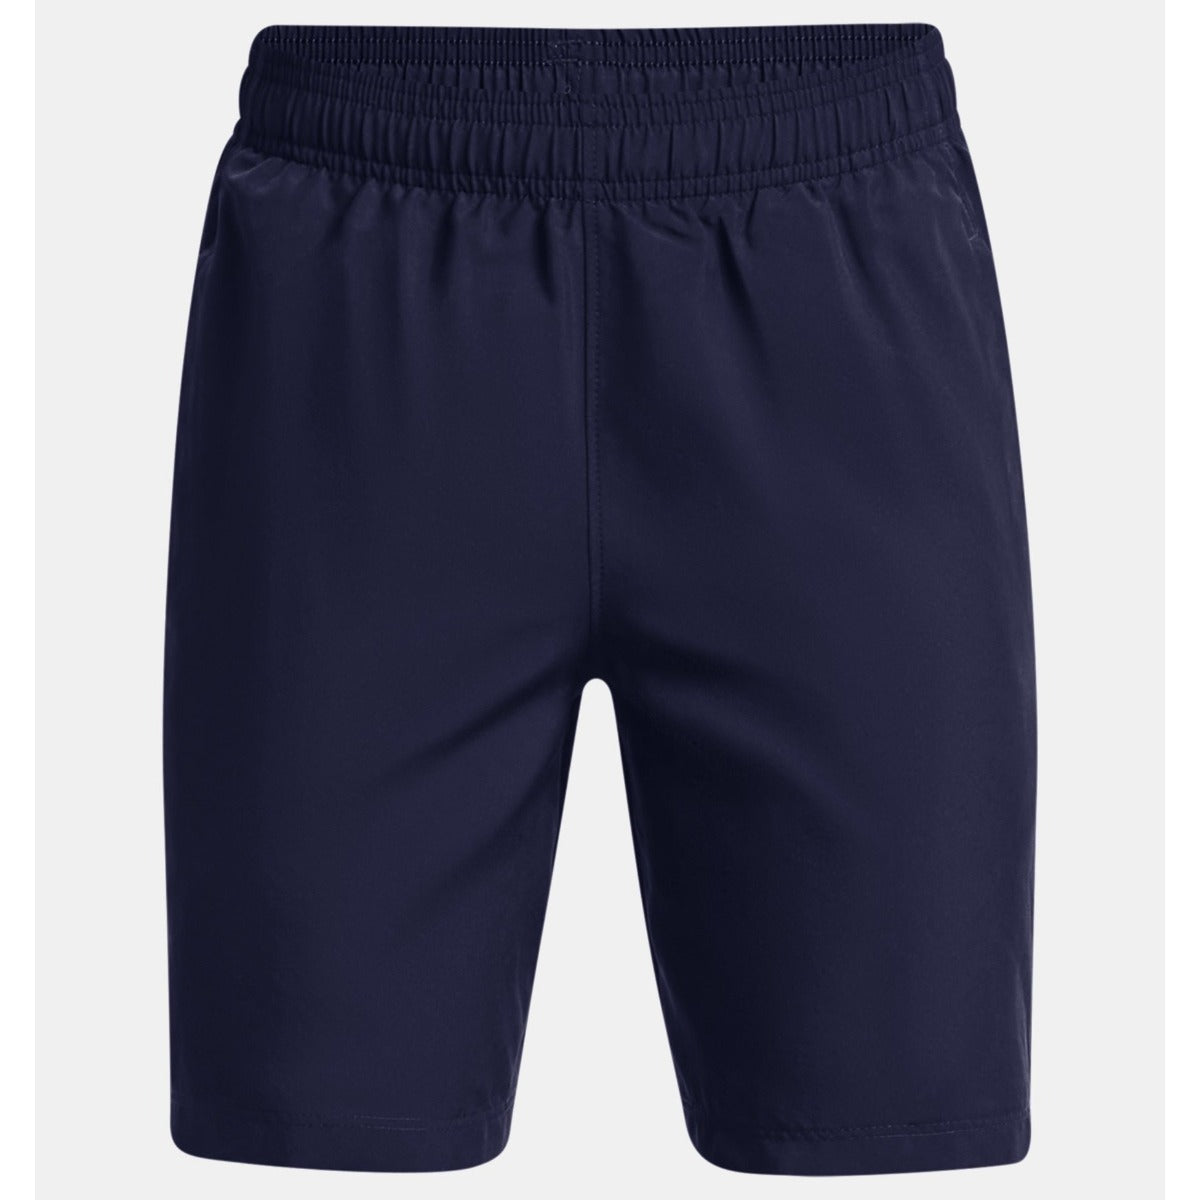 Under Armour Woven Graphic Shorts Boys (Navy 410)